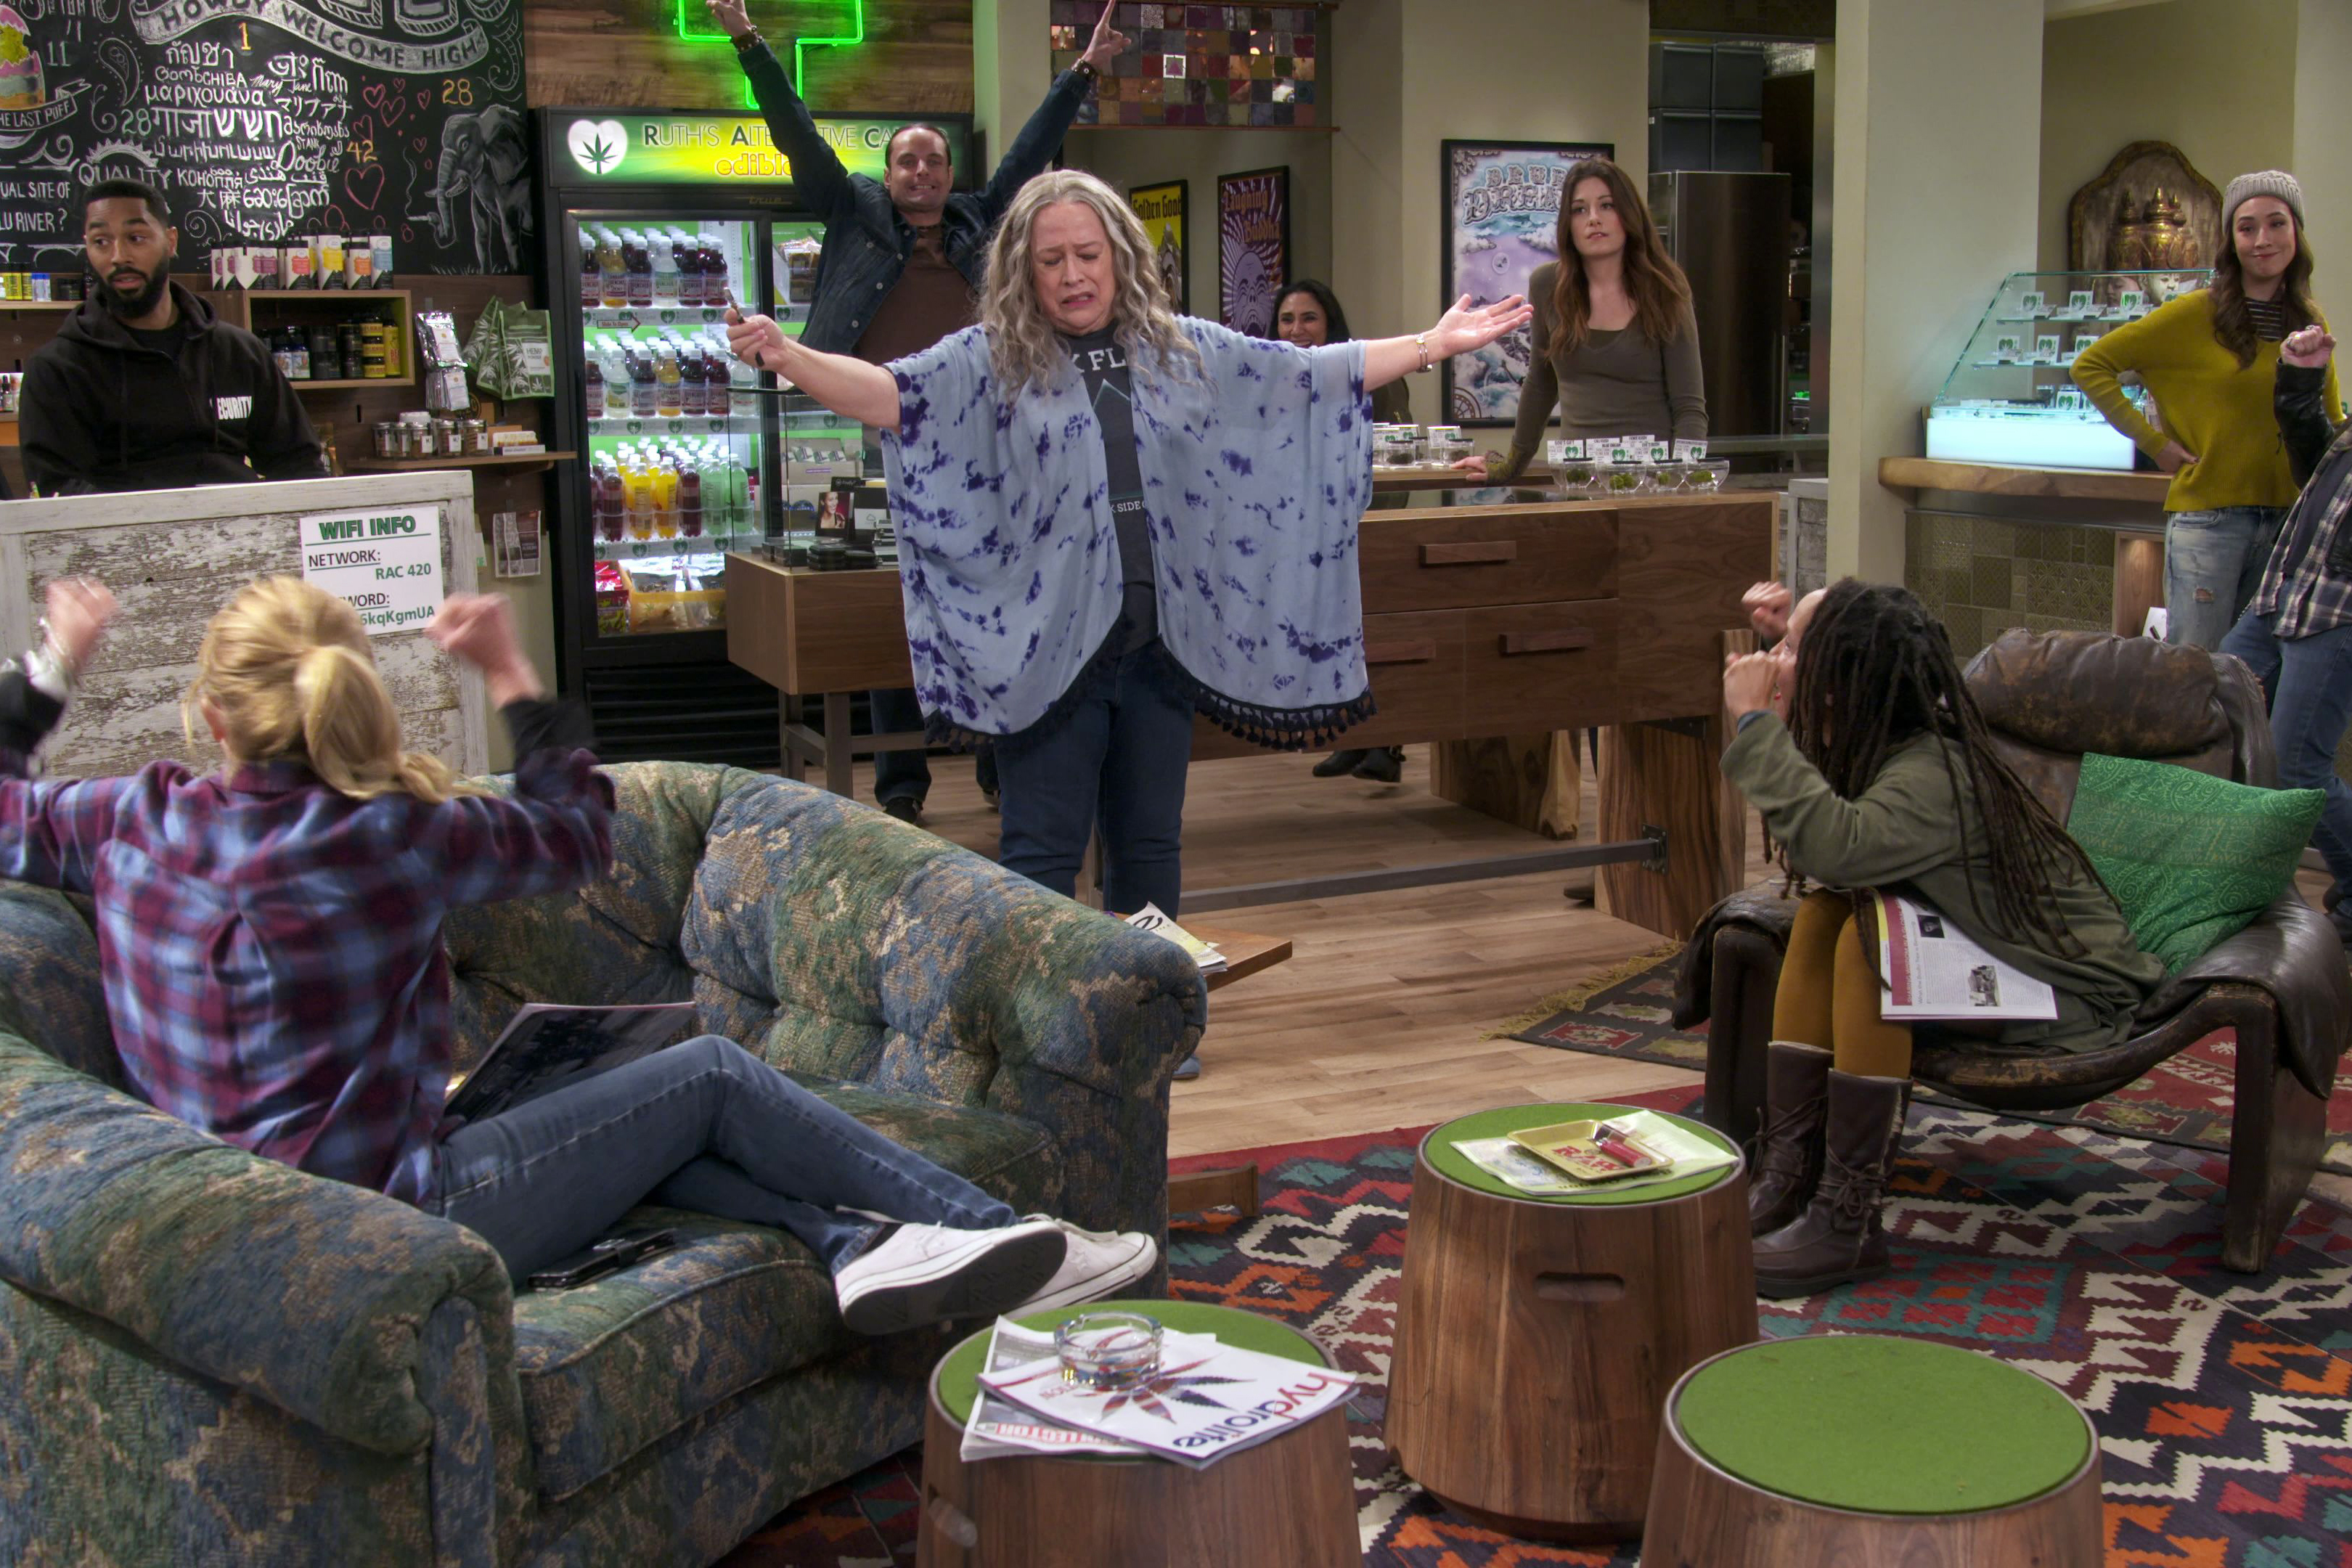 Disjointed: Kathy Bates Offers Free Joints in New Netflix Series Preview - canceled TV ...